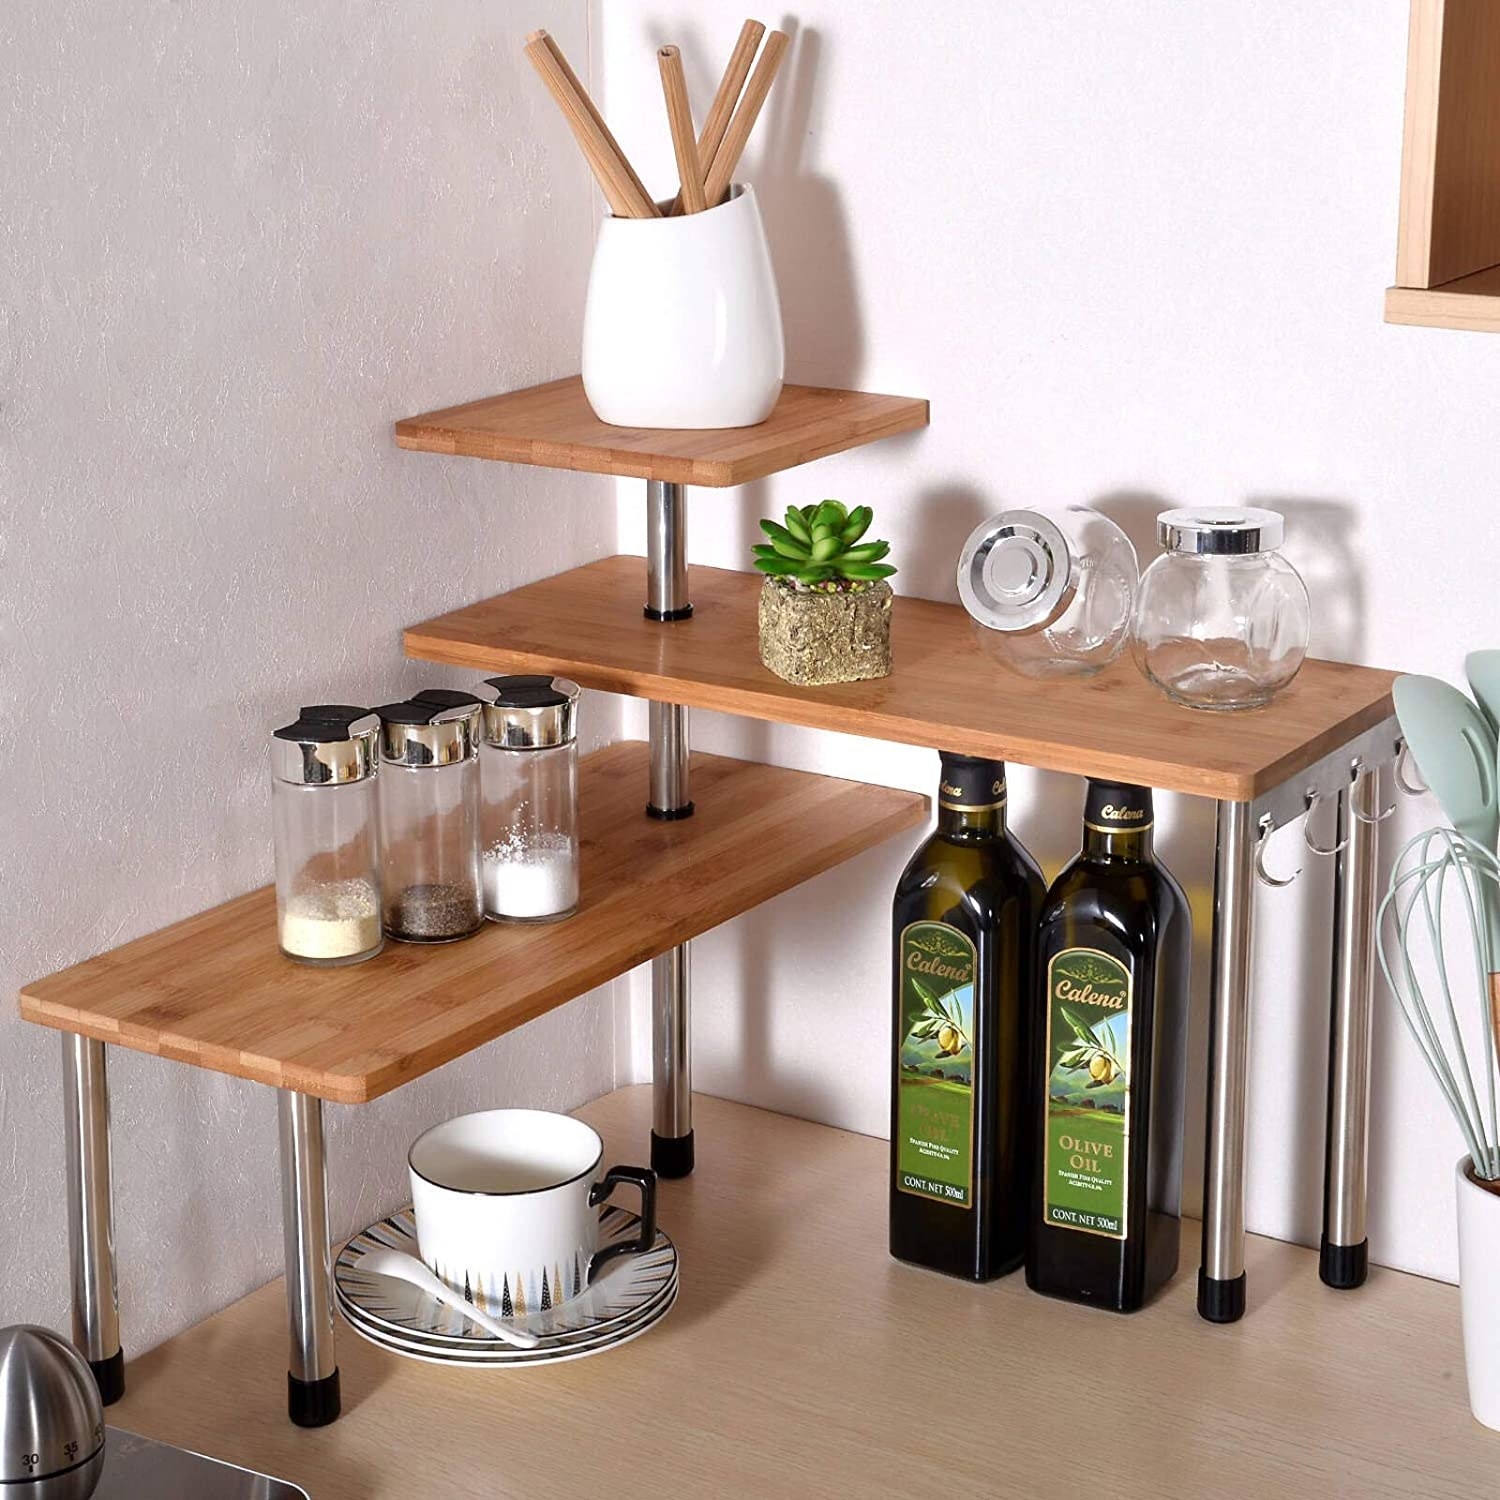 3-tier organization shelf arranged in the corner on a kitchen counter with spices, olive oil, and dishes resting on it